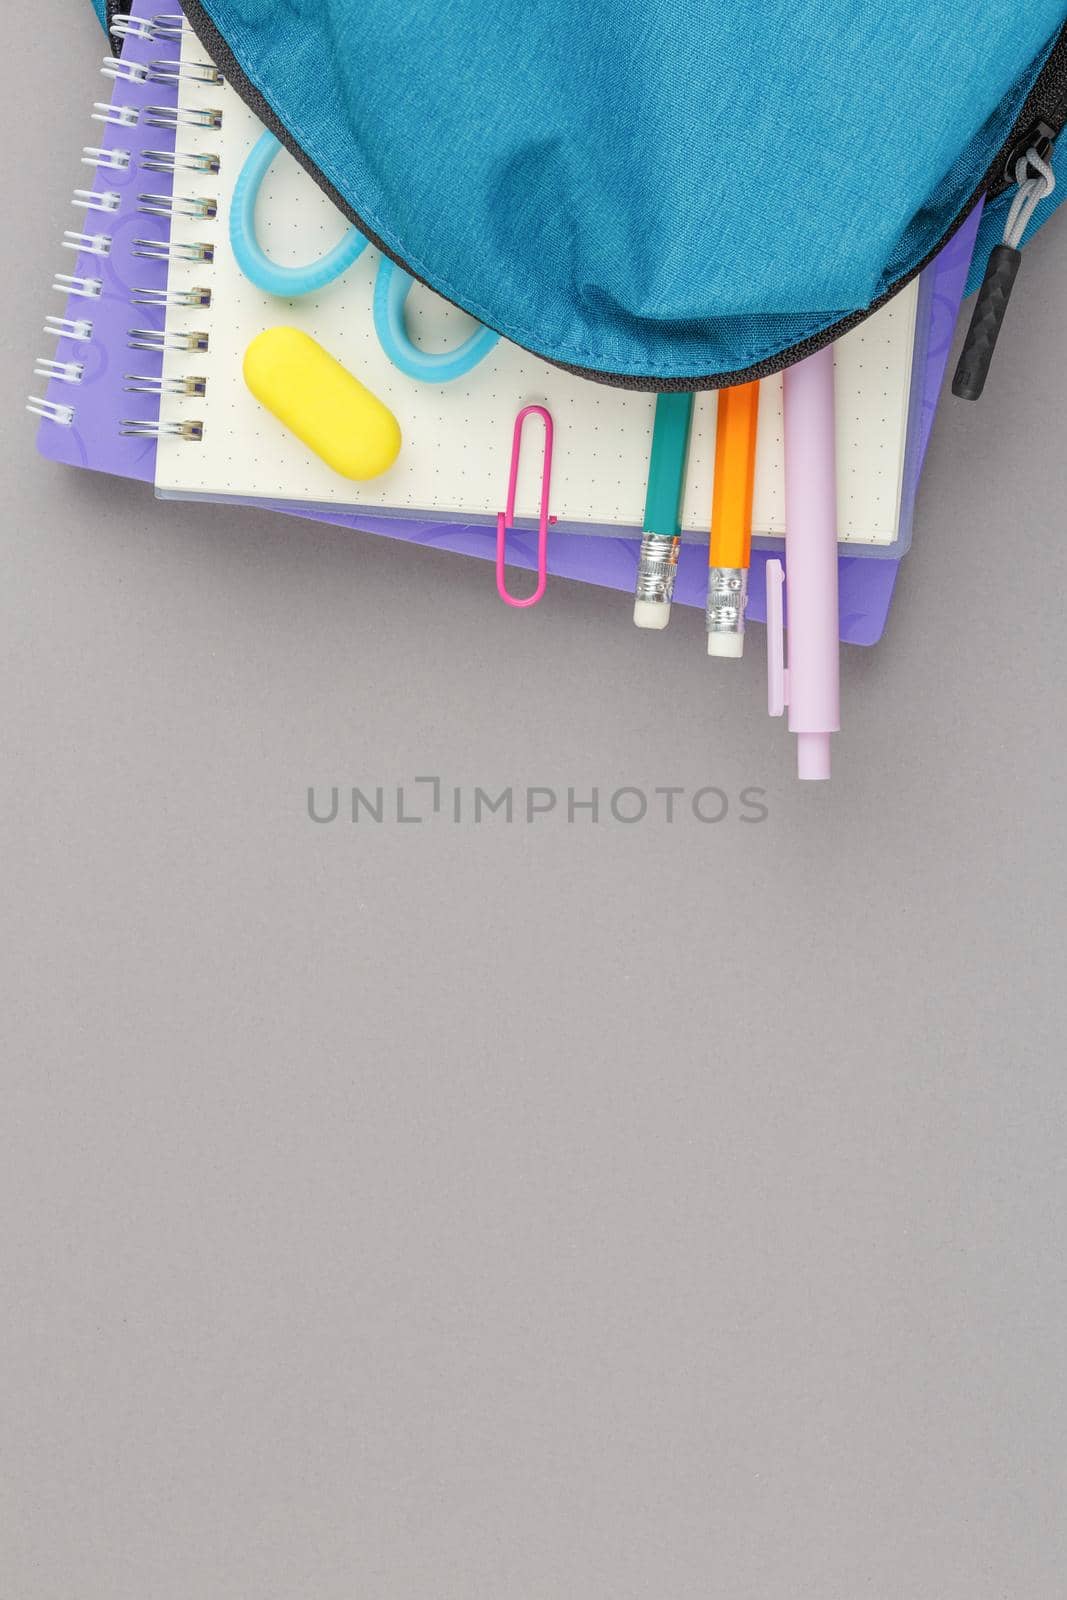 School backpack with educational supplies. by alexxndr